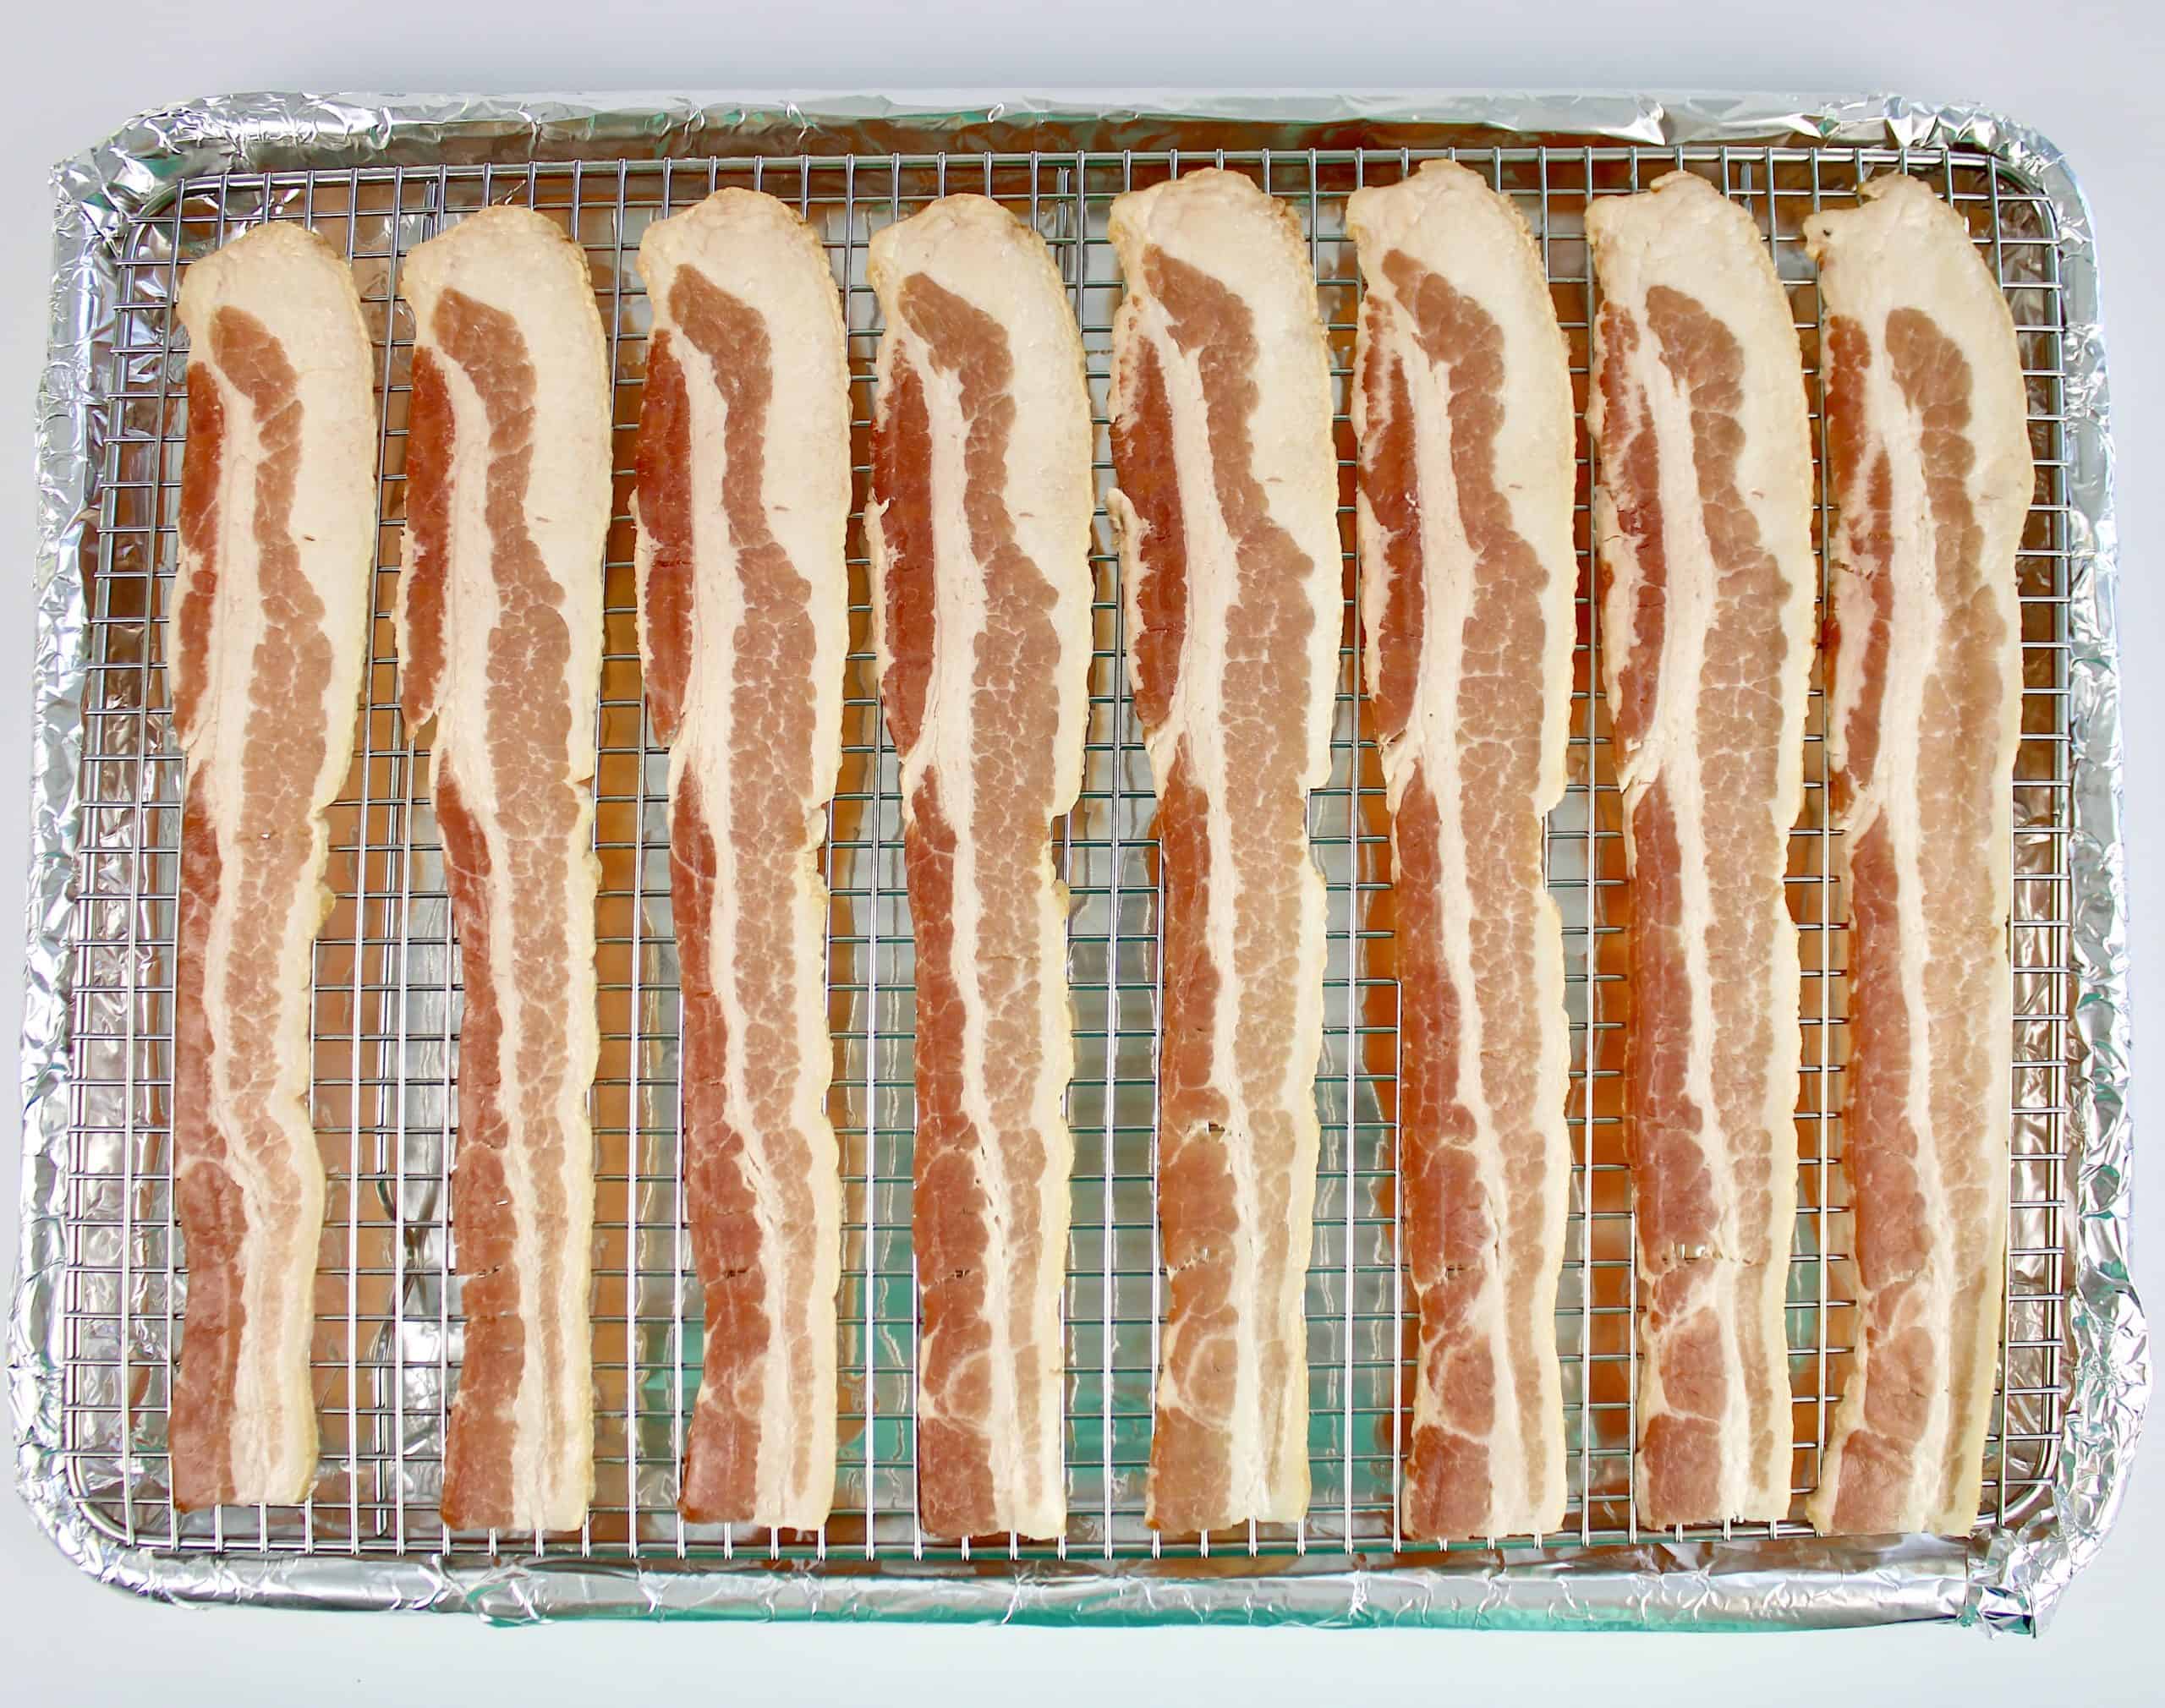 raw strips of bacon on wire rack and baking sheet